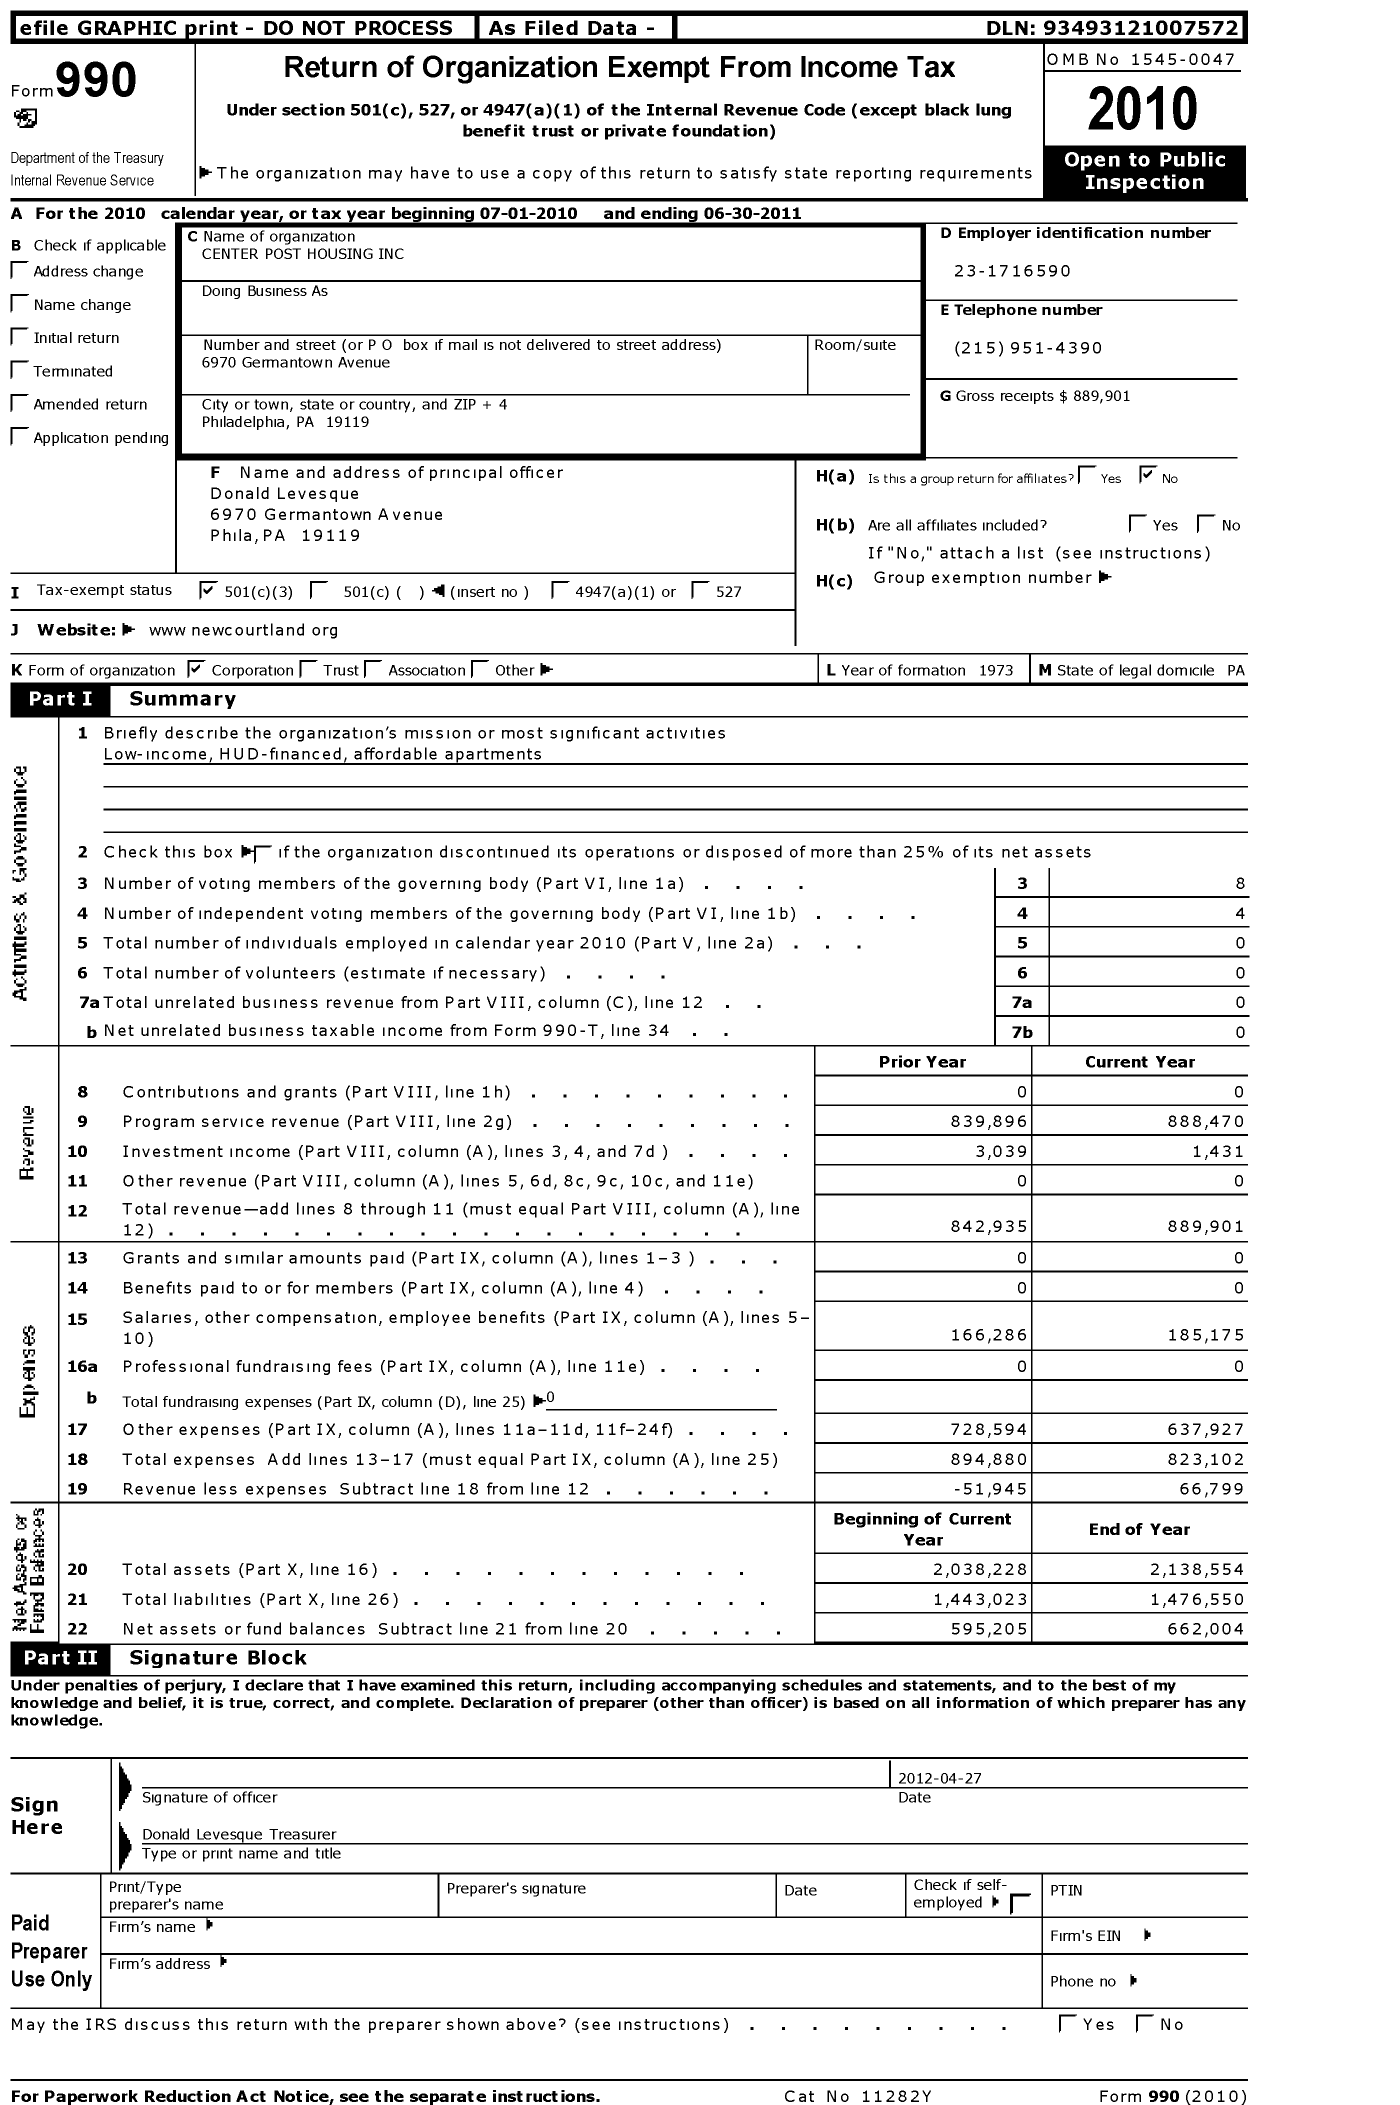 Image of first page of 2010 Form 990 for Center Post Housing